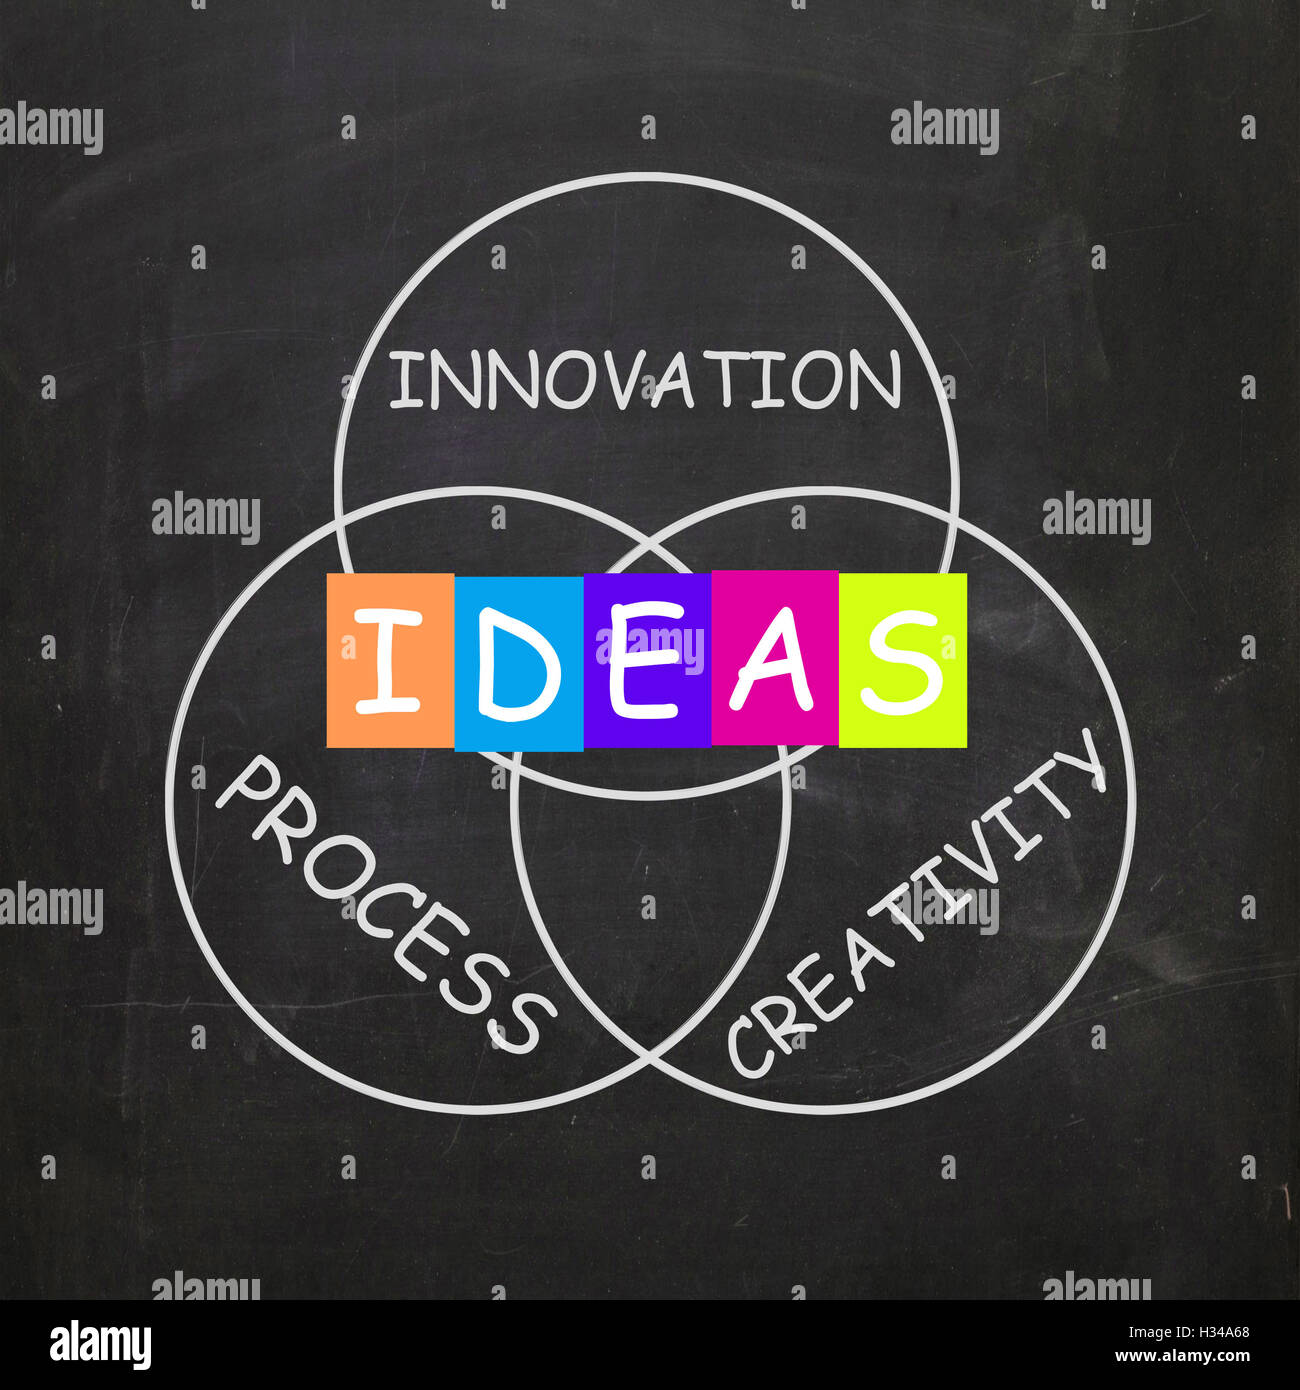 Words Refer to Ideas Innovation Process and Creativity Stock Photo